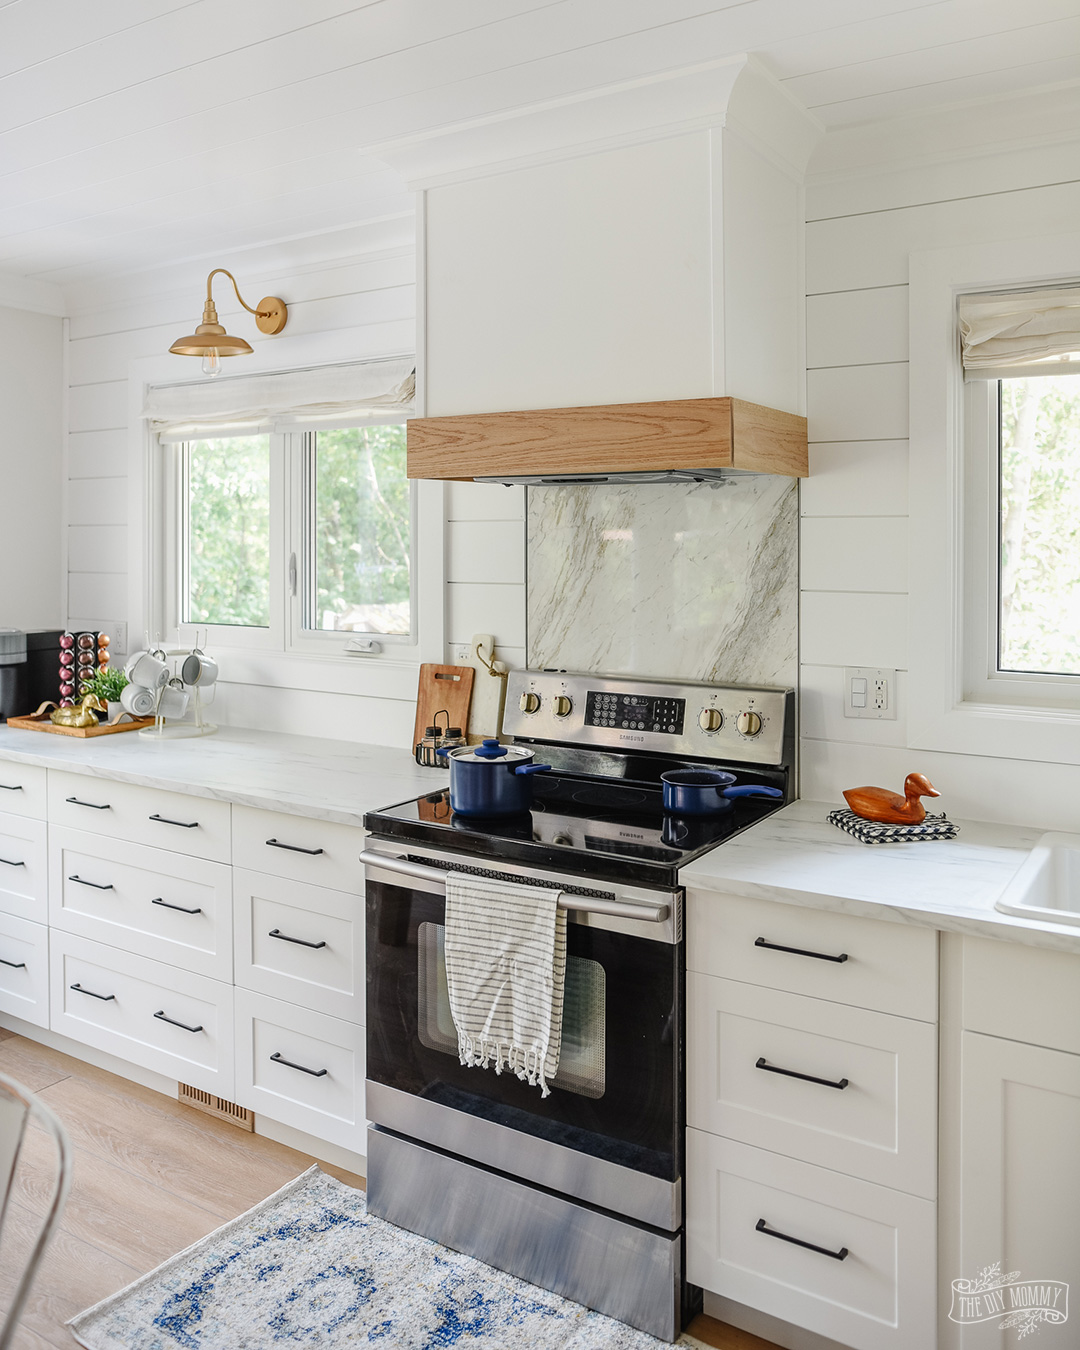 See how a dated honey oak kitchen was transformed into a coastal modern farmhouse kitchen with an eat-in layout, white shaker cabinets and white oak accents.